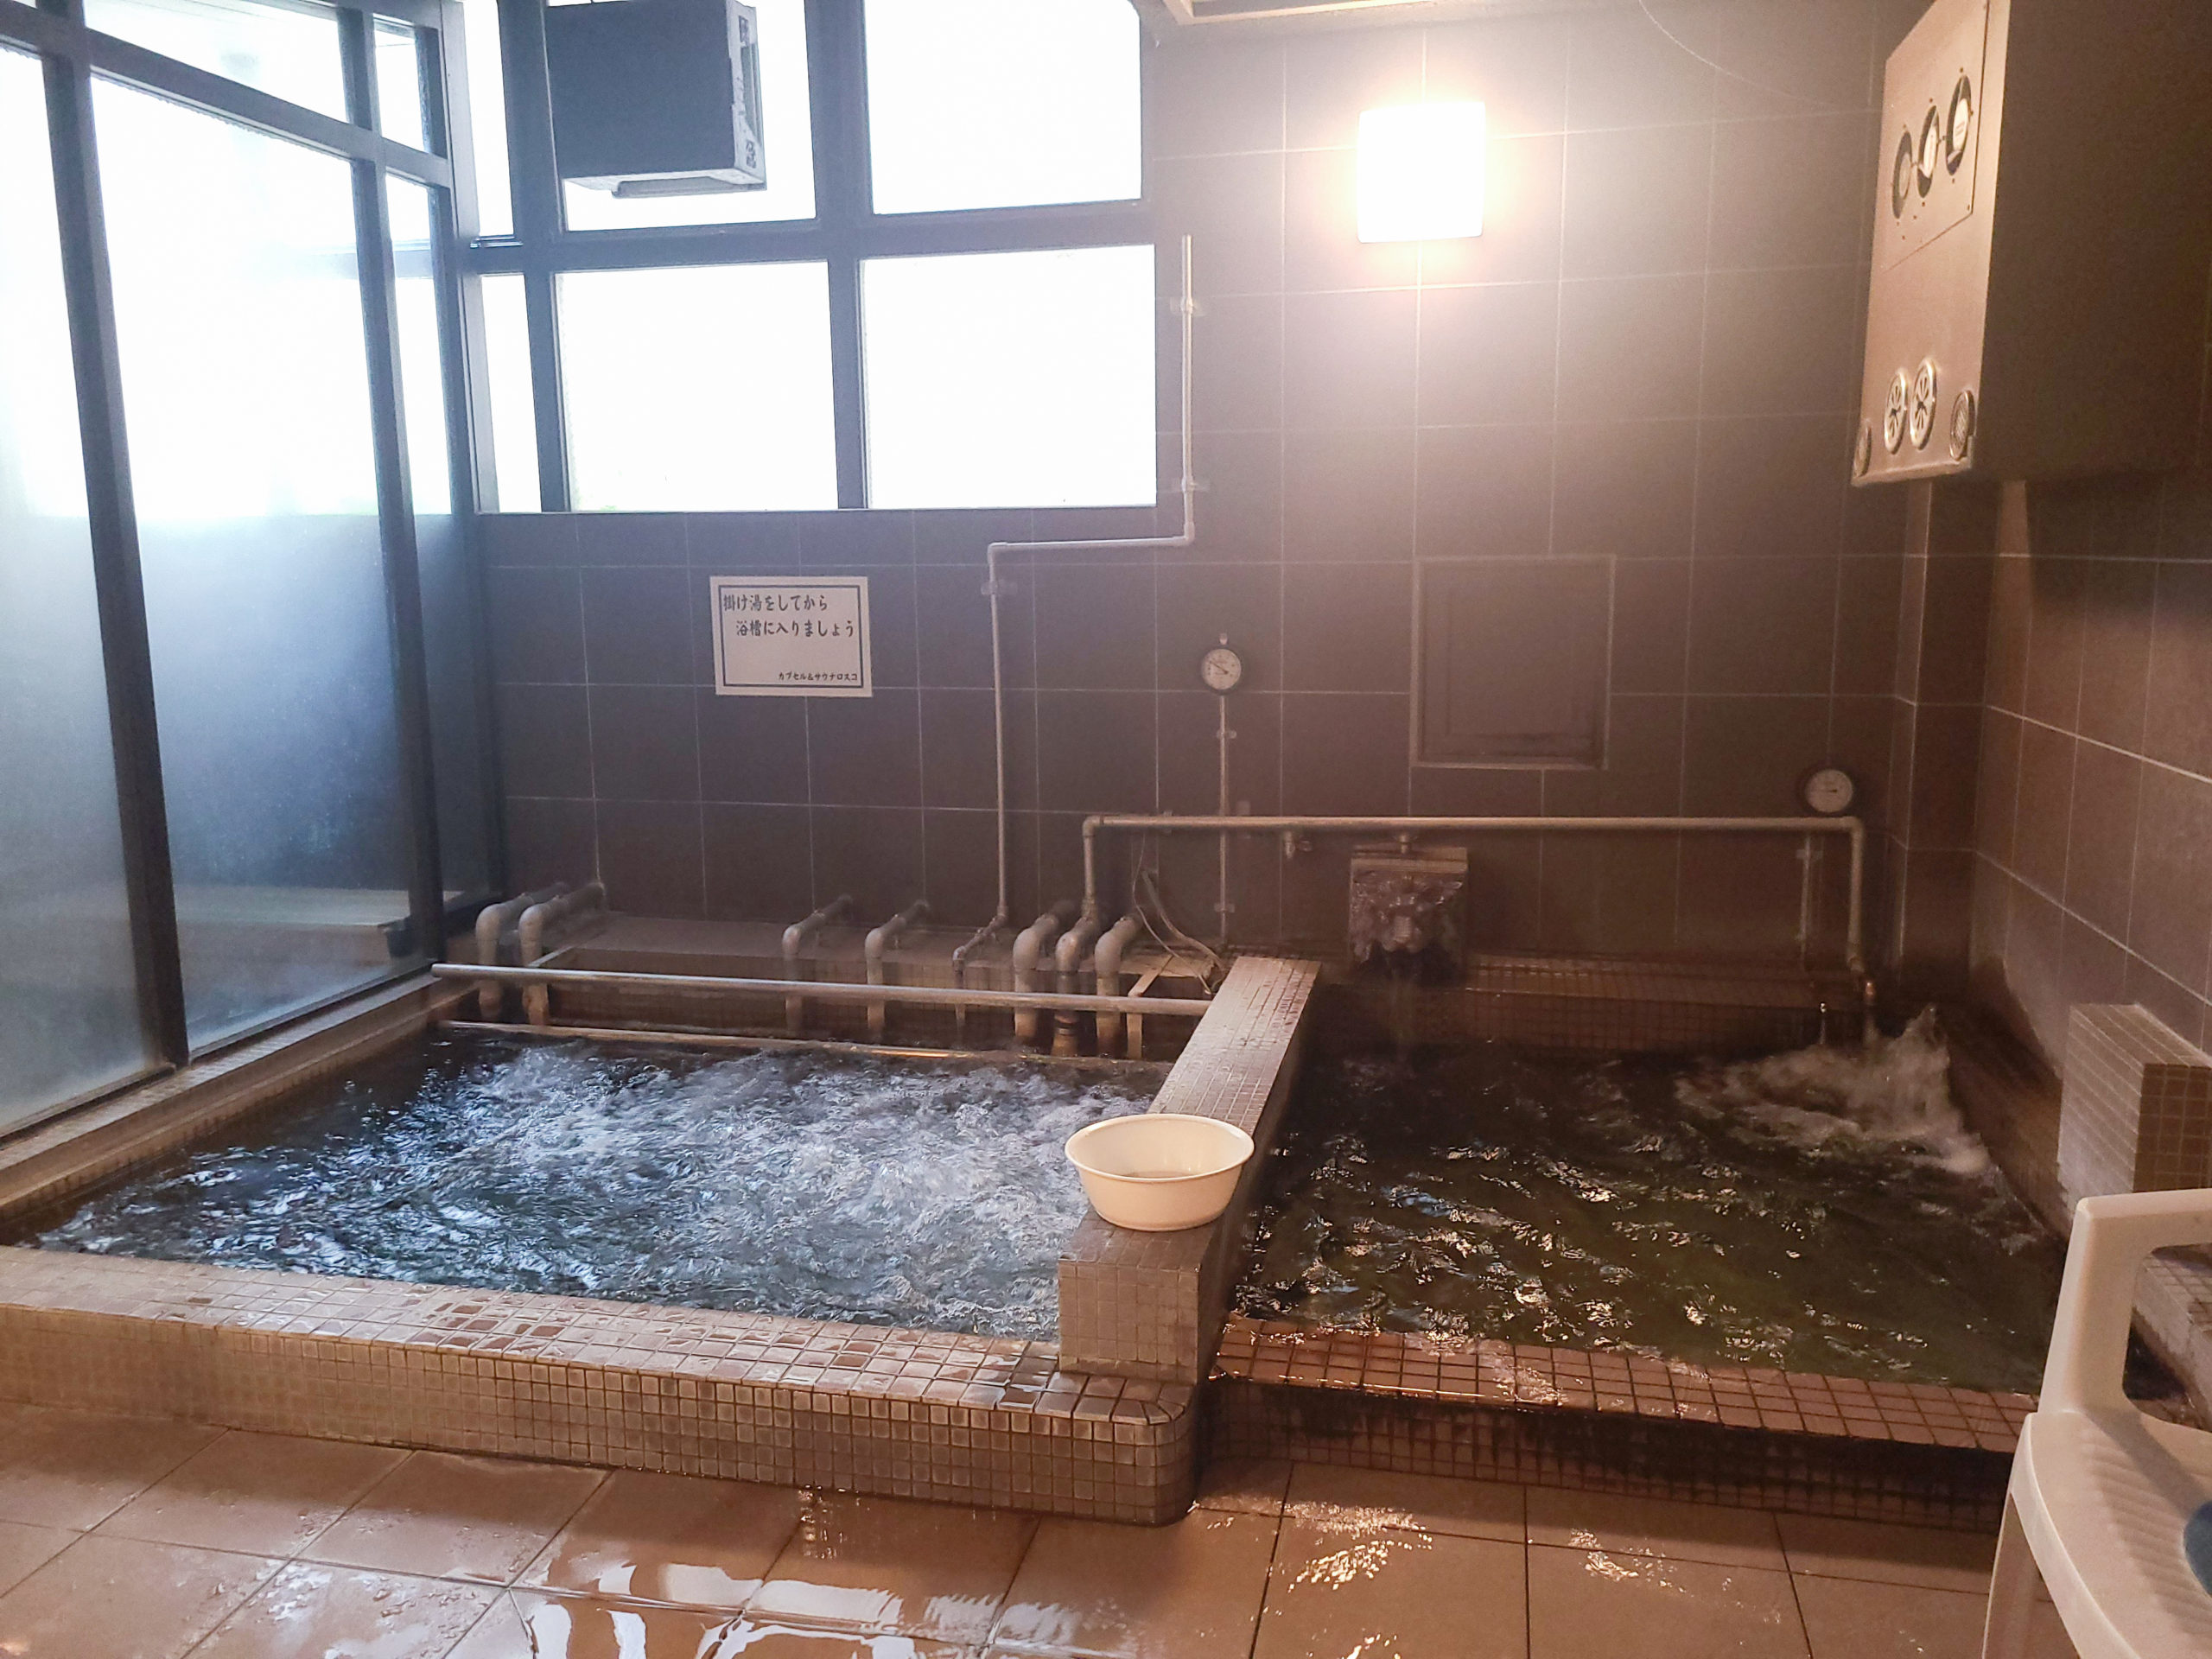 The mizuburo cold-water bath that uses natural spring water is this hotel’s unique feature 